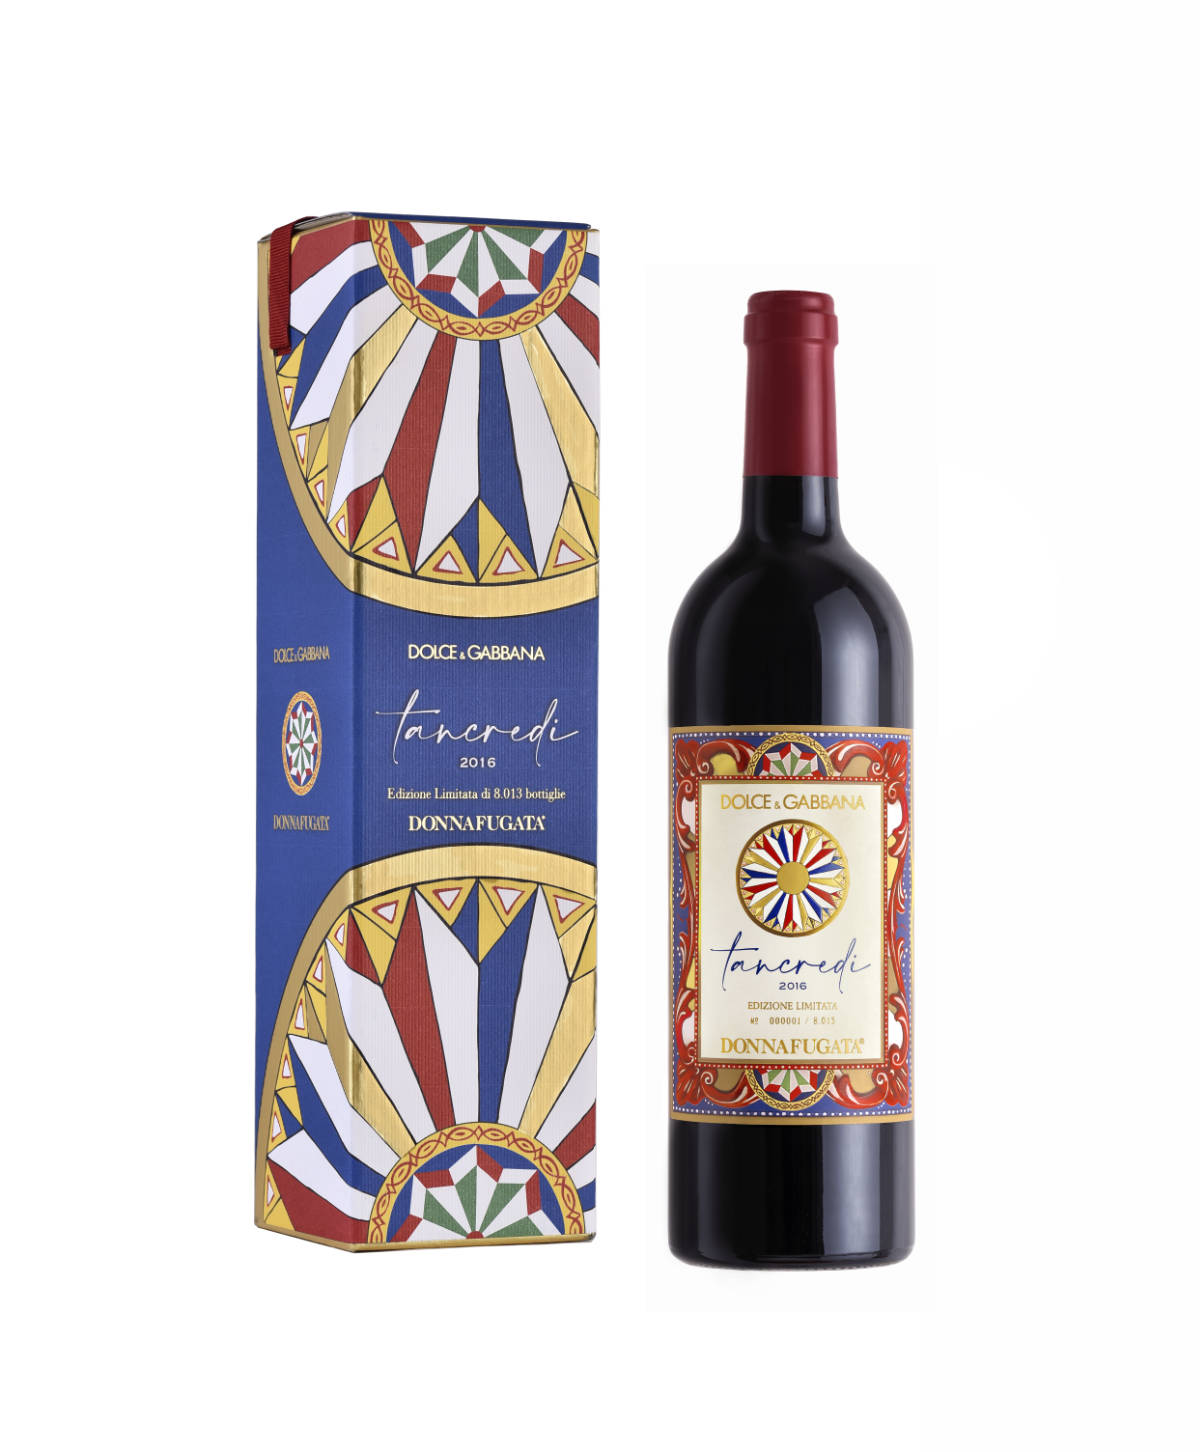 Dolce&Gabbana and Donnafugata: Tancredi 2016 limited and numbered edition